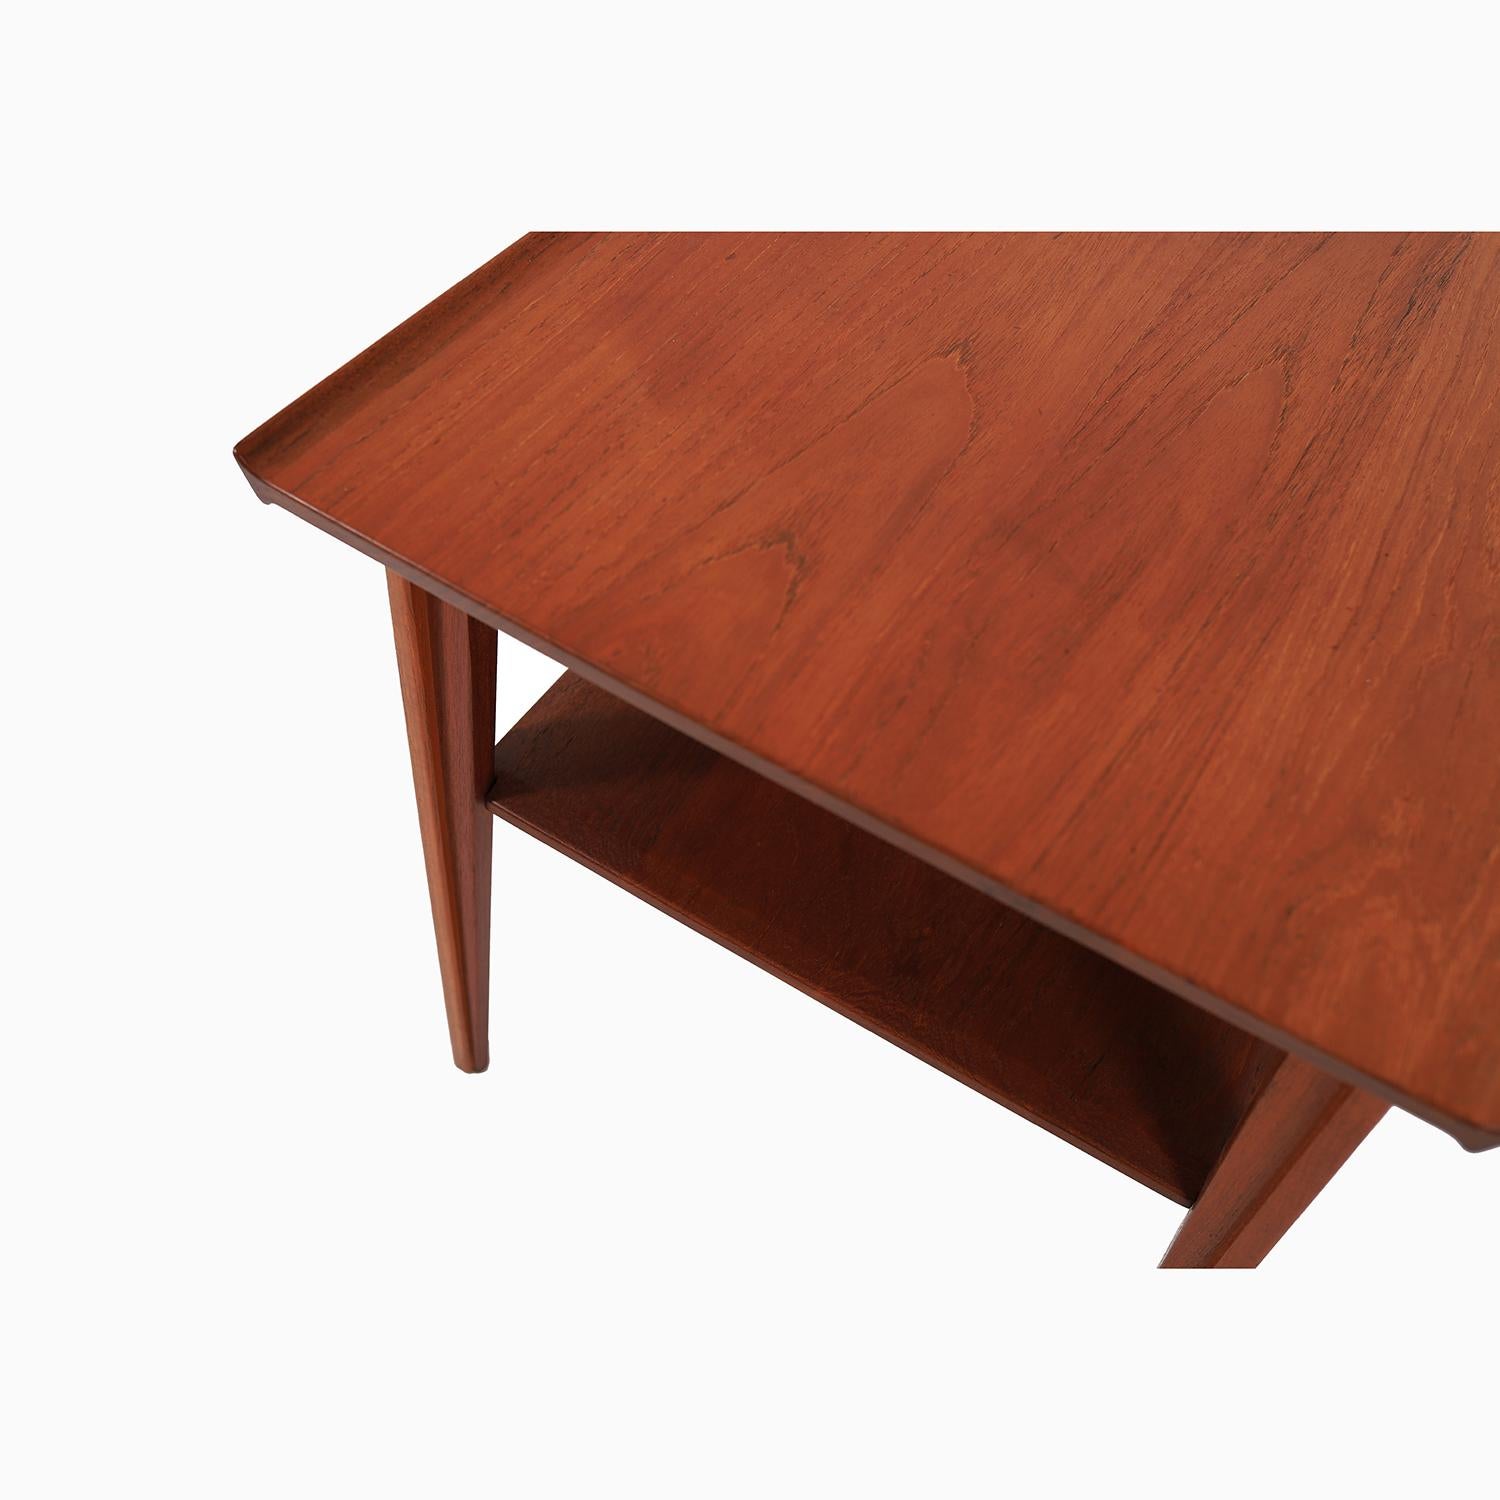 A solid teak side table with magazine shelf designed by Finn Juhl for France & Daverkosen. An occasional table design that Finn Juhl himself had in his own home. This design was part of his Japan series. Inspired designs by the architecture and